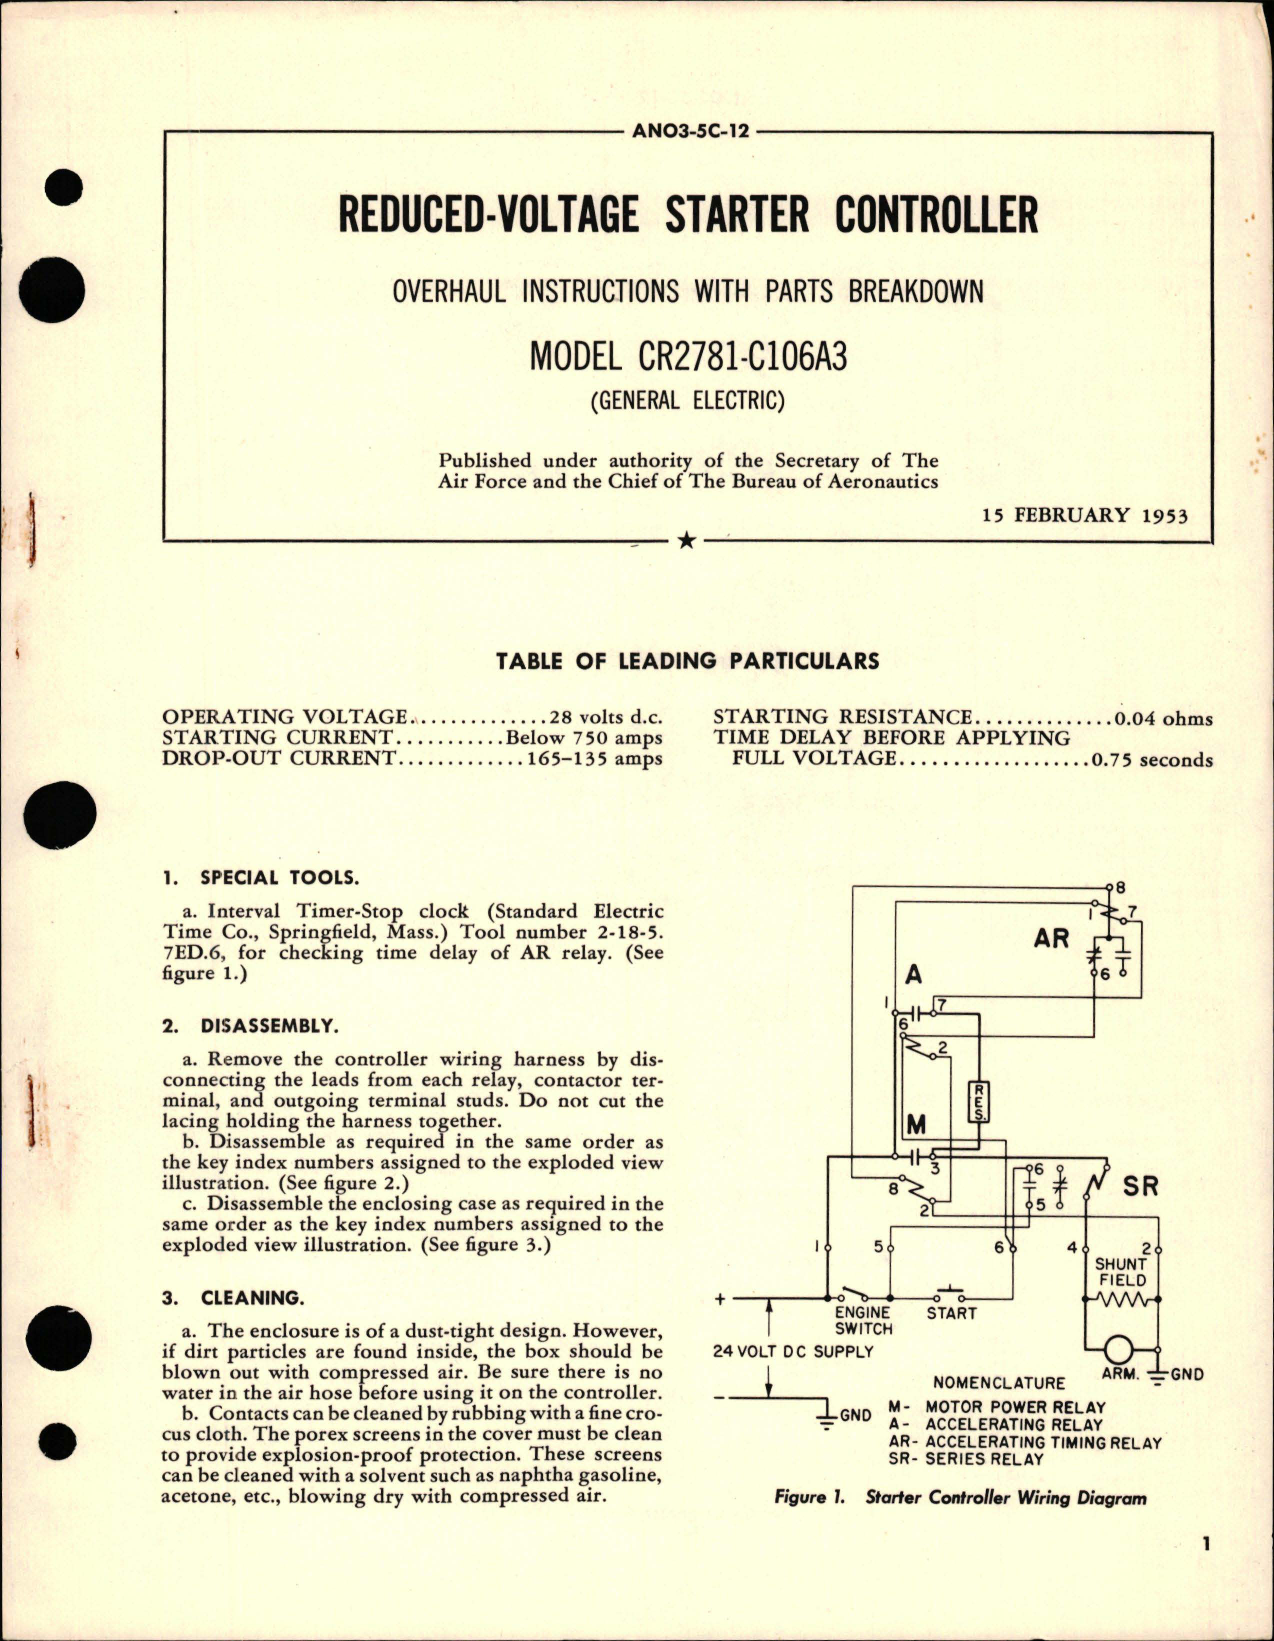 Sample page 1 from AirCorps Library document: Overhaul Instructions with Parts Breakdown for Reduced Voltage Starter Controller - Model CR2781-C106A3 